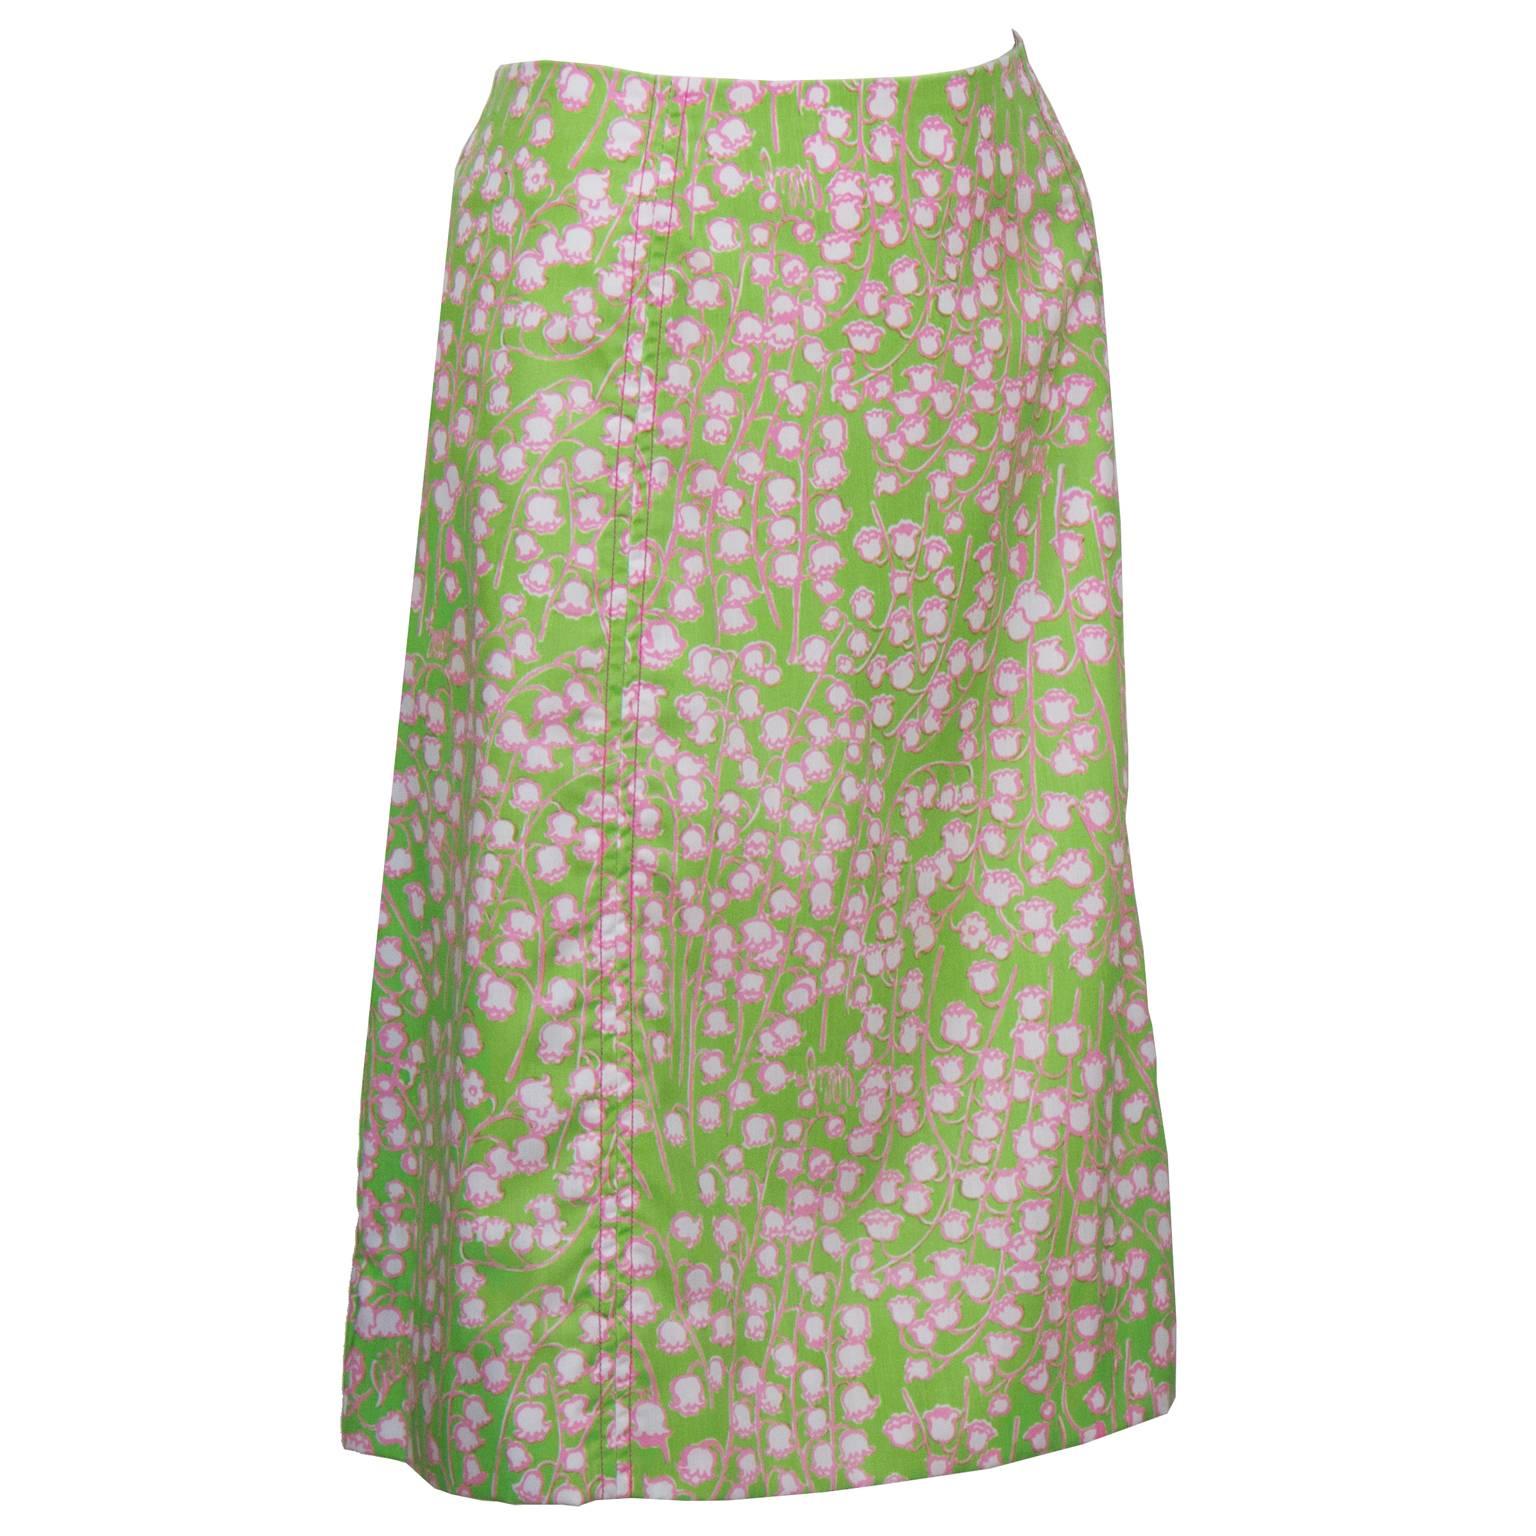 Classic style and pattern Lilly Pulitzer lime green skirt from the 1960's. The skirt has an all over print of white Lily of the Valley flowers outlined in pink. One side patch pocket, zipper up the back. In excellent condition. Fits like a US 8-10.